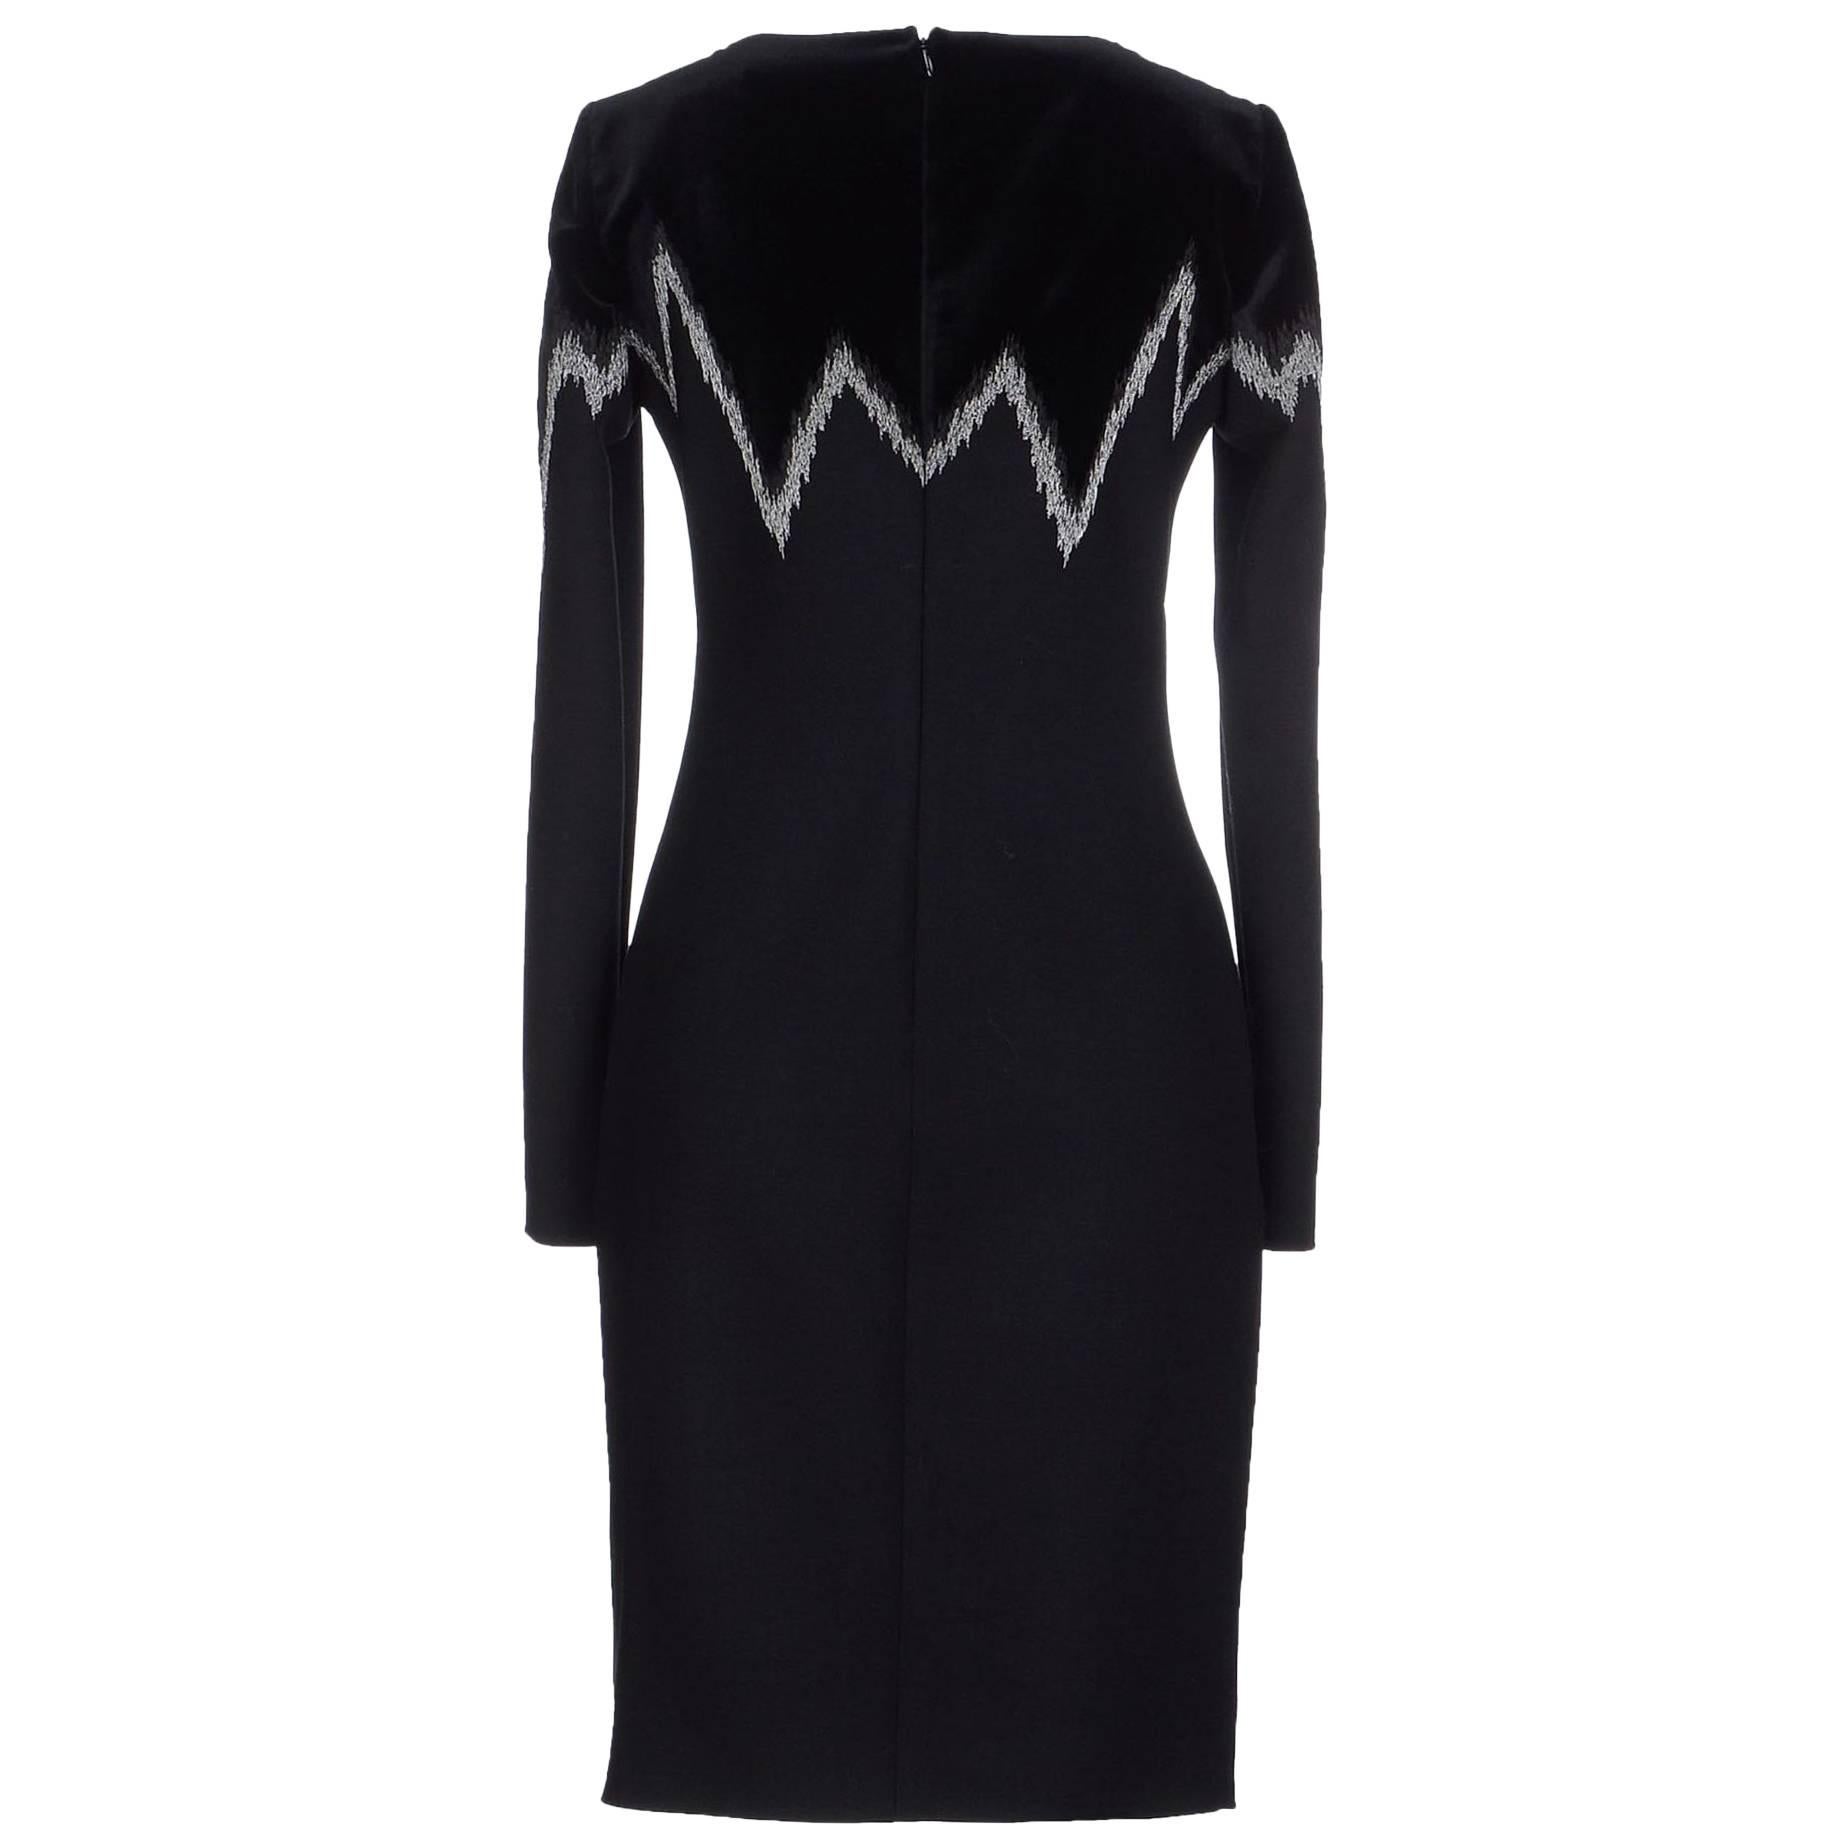 New EMILIO PUCCI Metallic Embroidered Black Wool Velour Dress It.46 For Sale